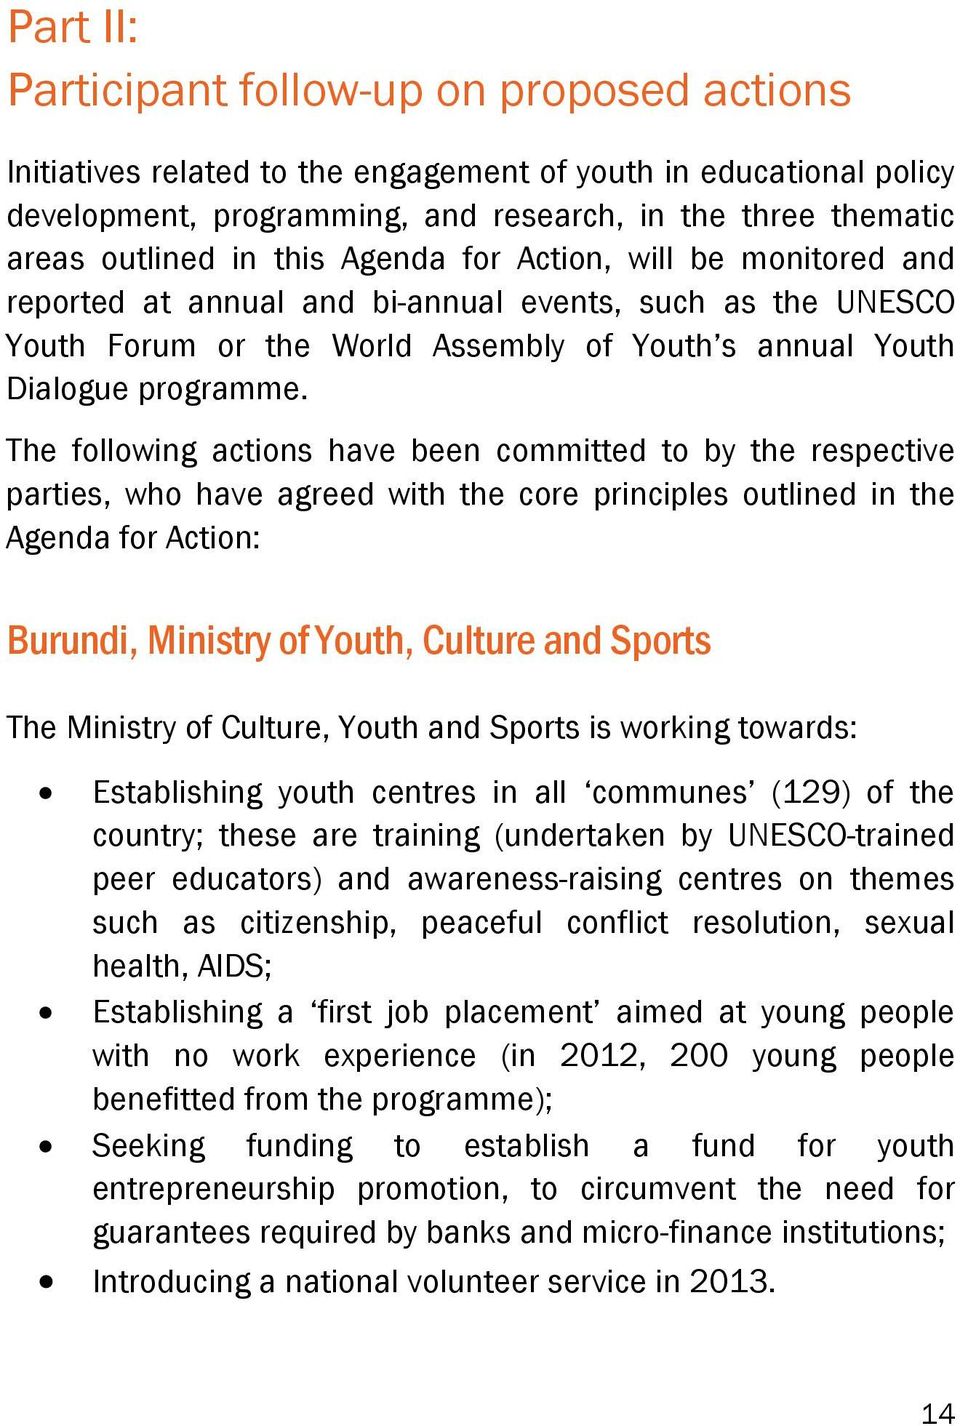 The following actions have been committed to by the respective parties, who have agreed with the core principles outlined in the Agenda for Action: Burundi, Ministry of Youth, Culture and Sports The